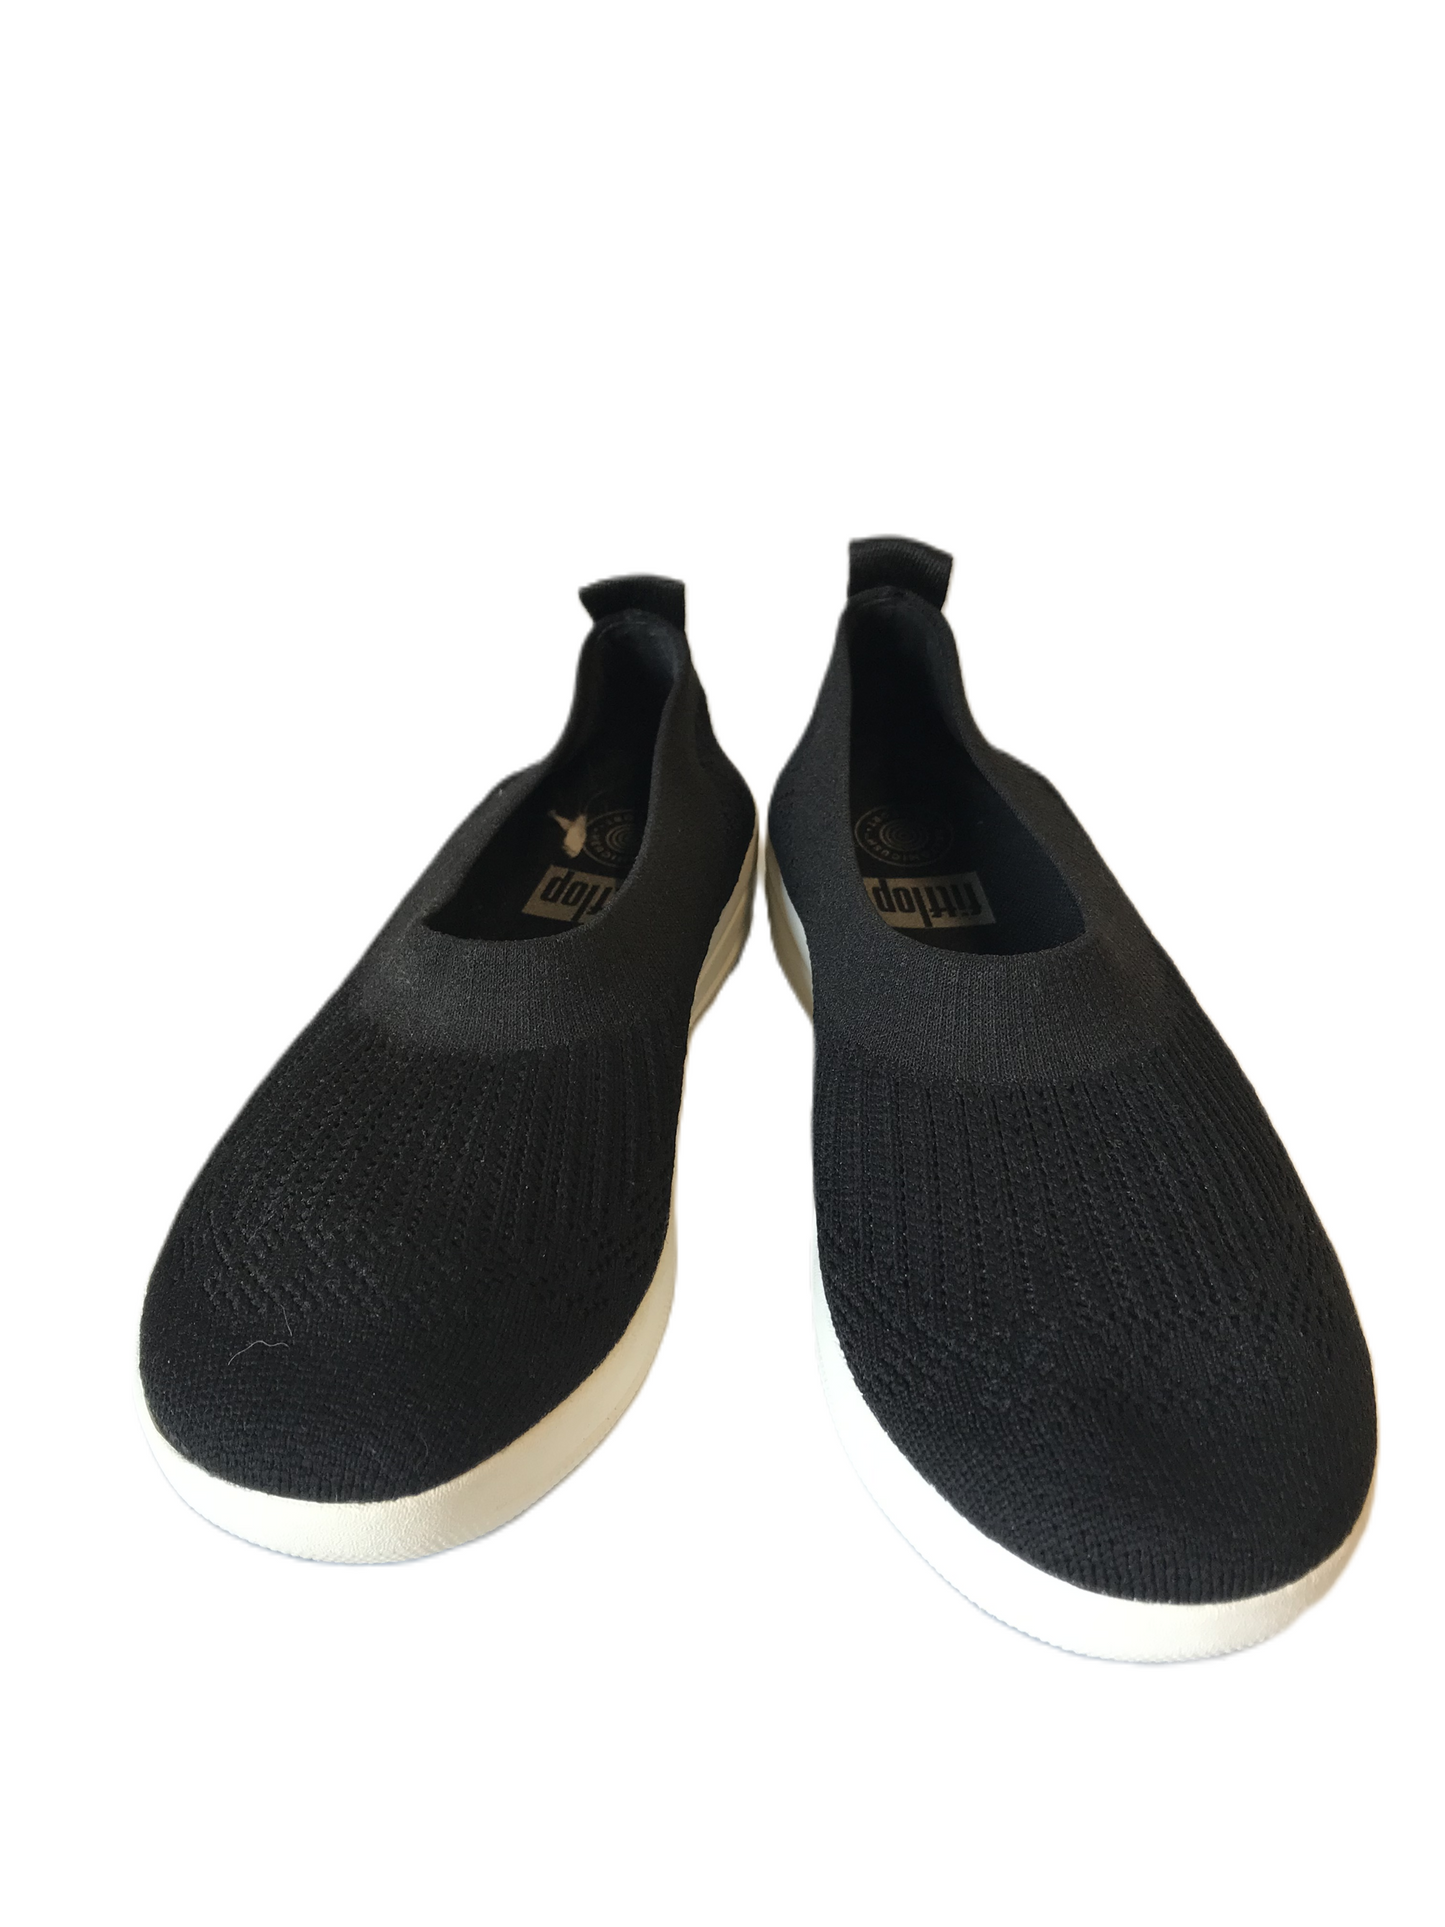 Black Shoes Flats By Fitflop, Size: 9